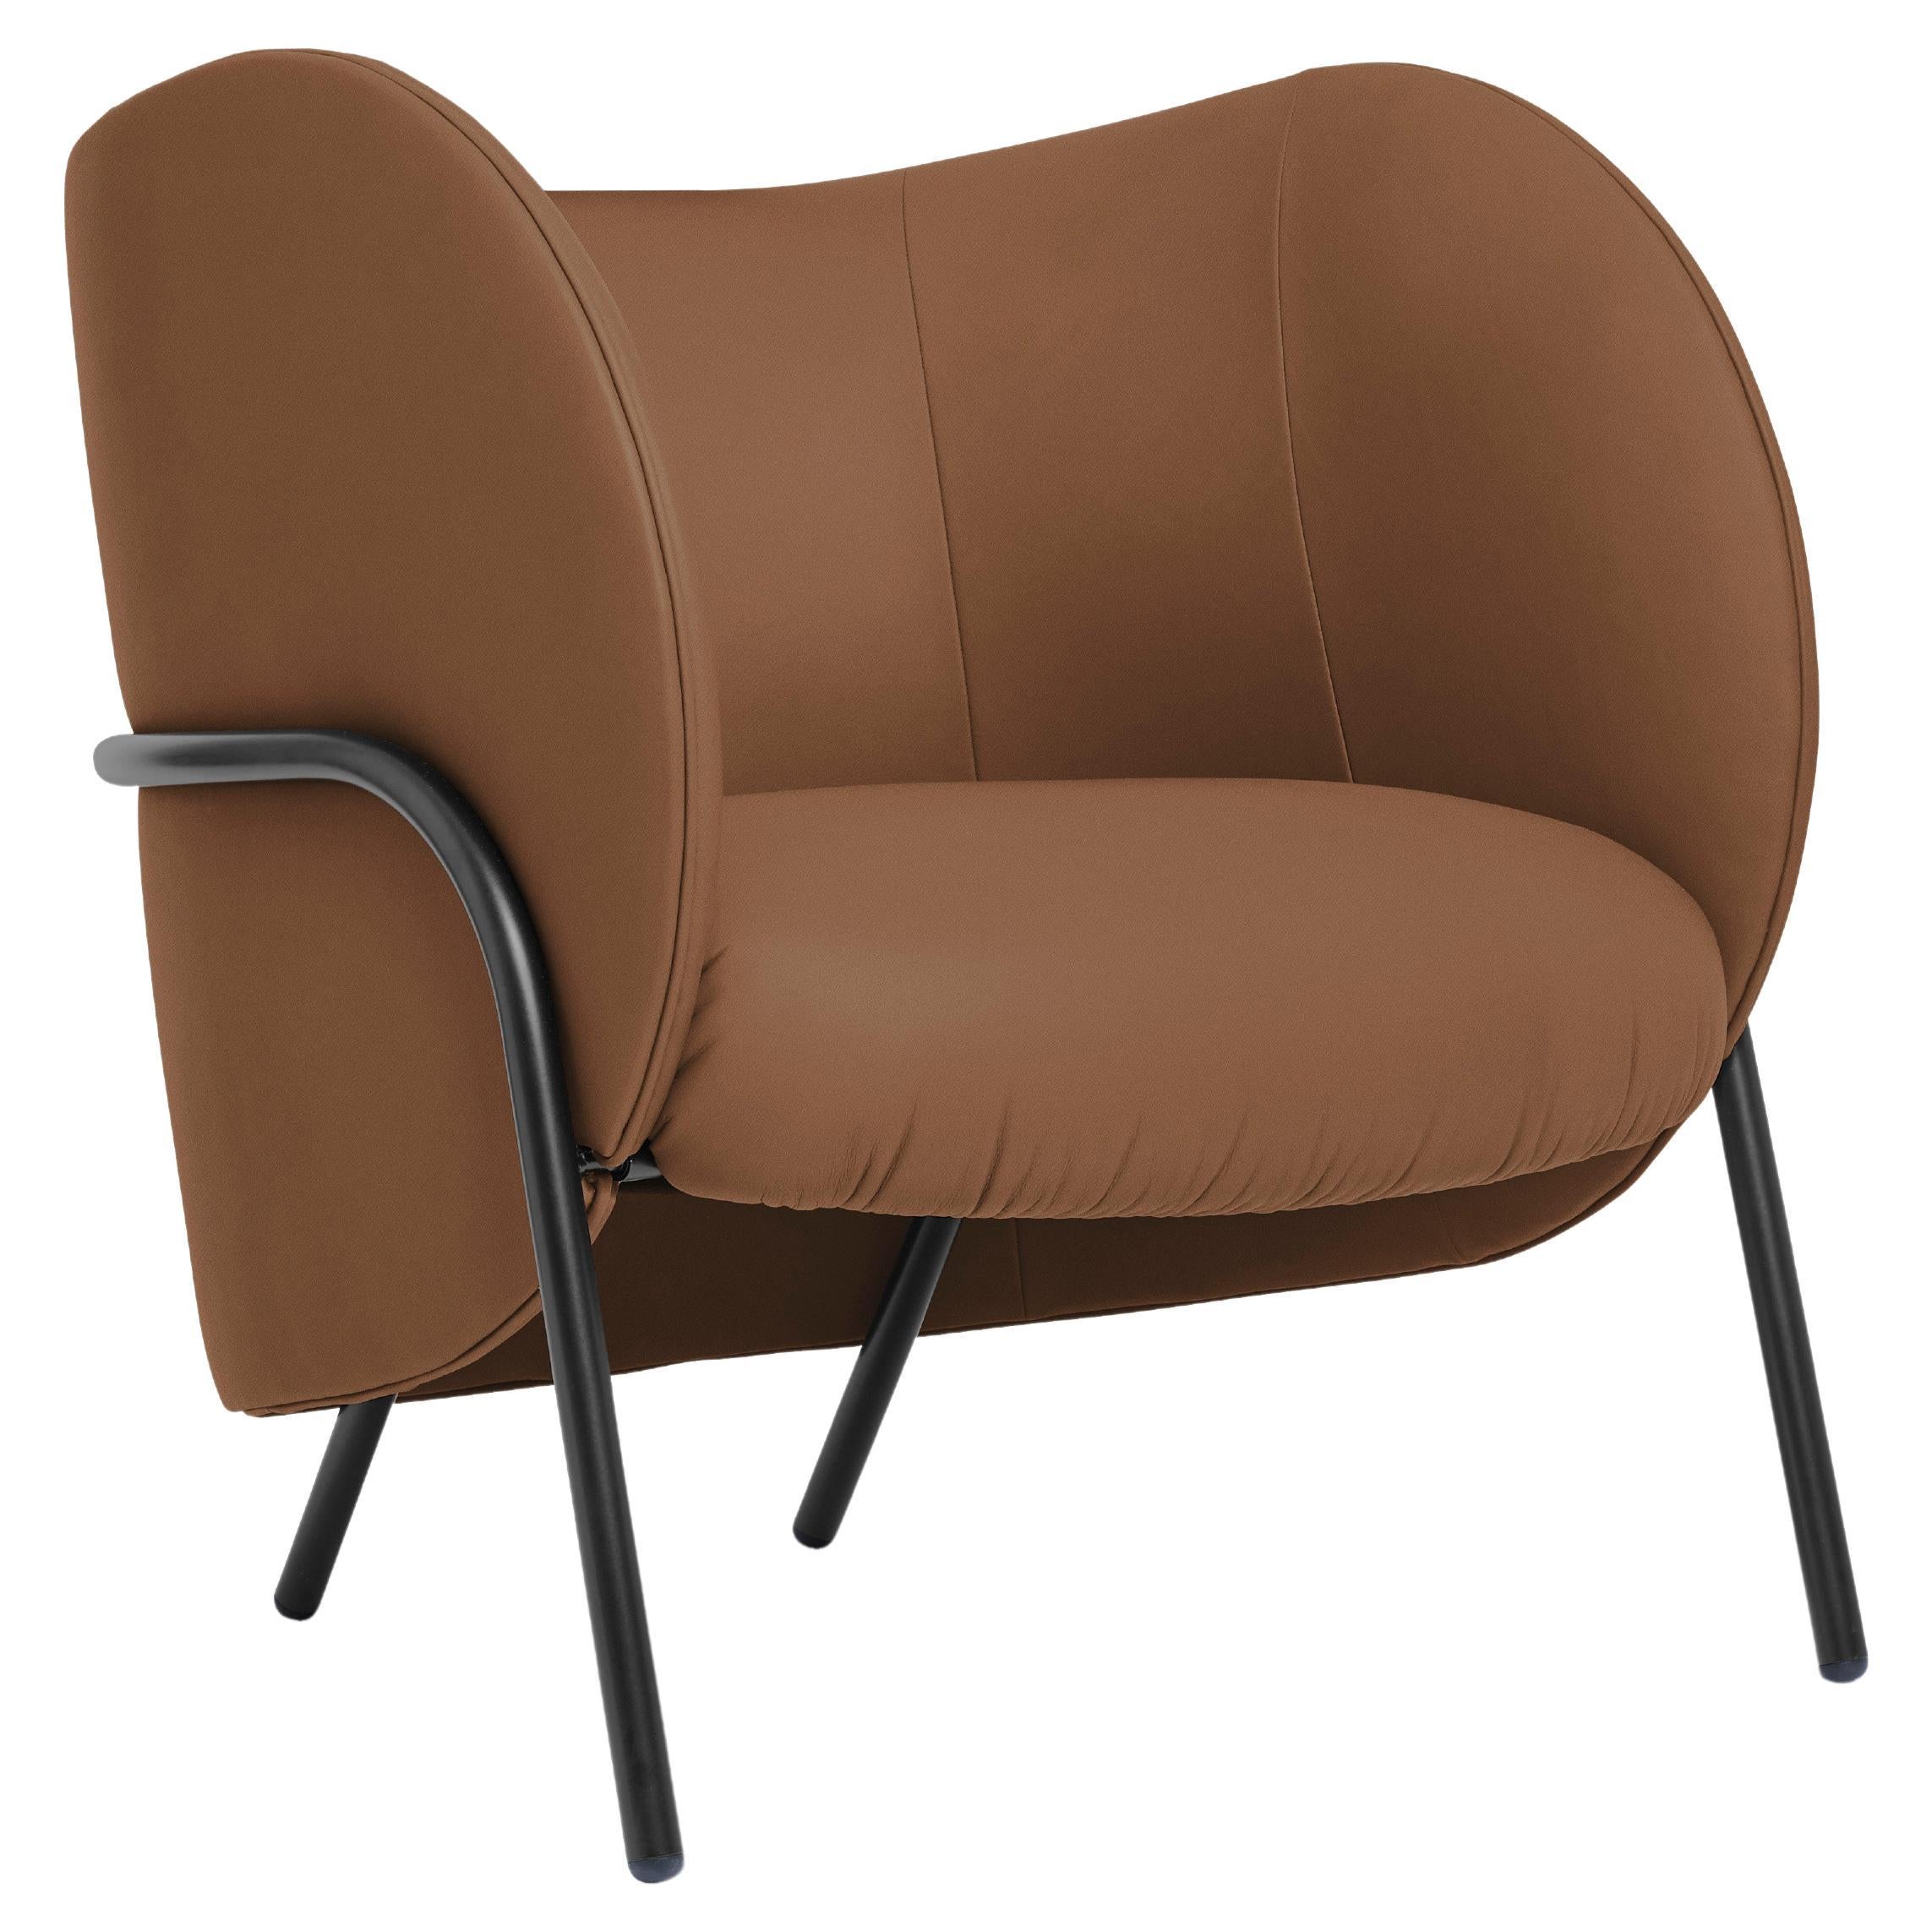 SP01 Royce Armchair in Antwerp Tan Leather, Made in Italy